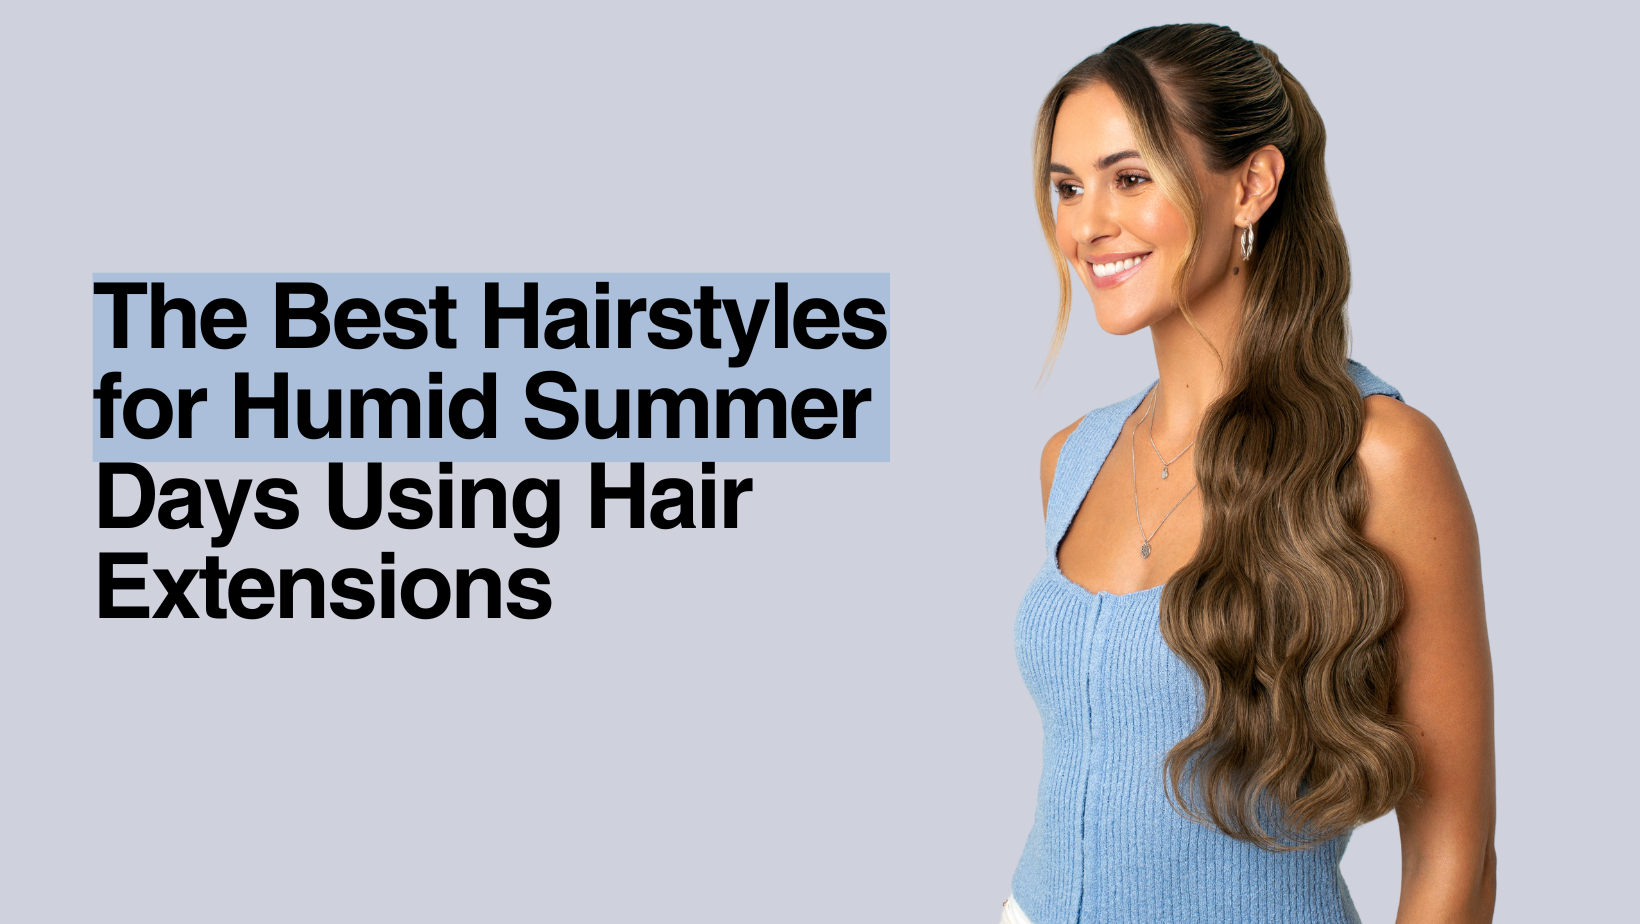 The Best Hairstyles for Humid Summer Days Using Hair Extensions